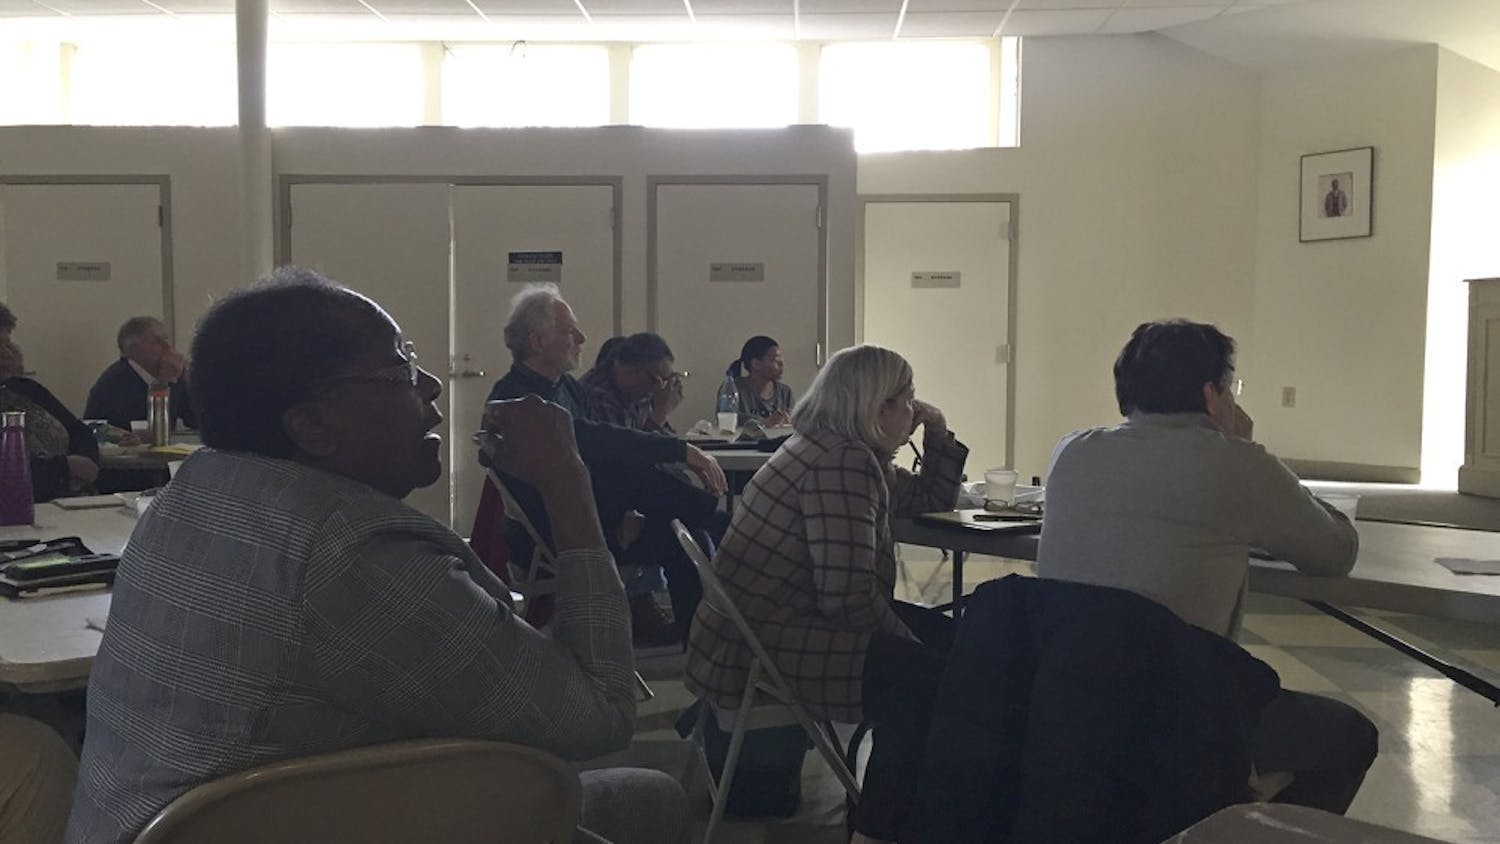 Chapel Hill townspeople met at Hargraves Community Center to give input on future development of West Rosemary street.